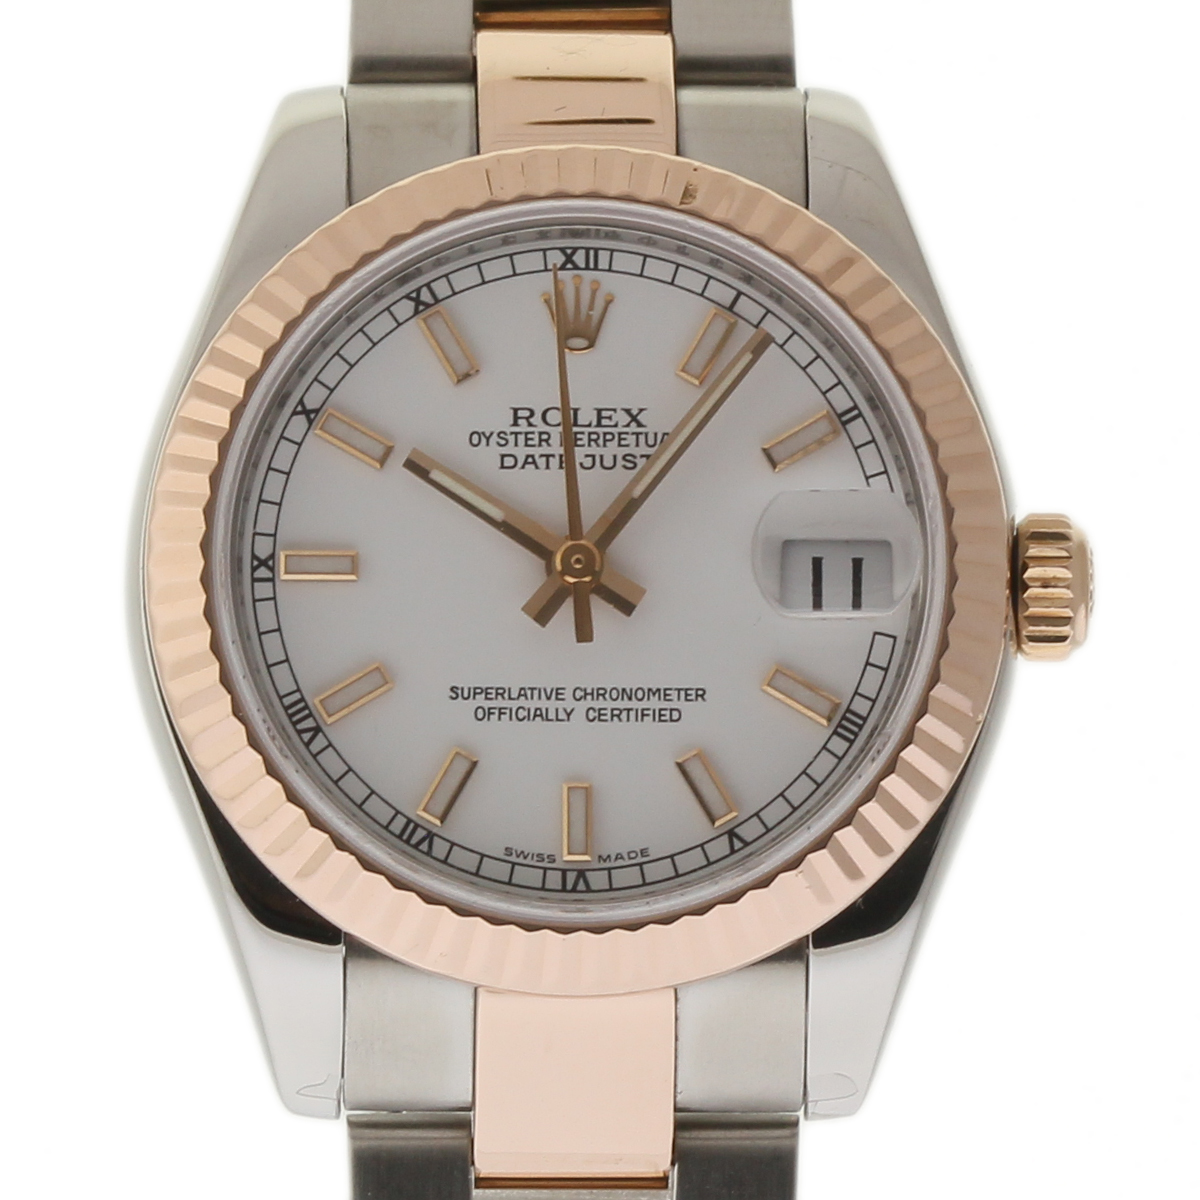 Datejust Lady's - 2-Tone - Fluted Bezel - 31mm on Oyster Bracelet with White Stick Dial